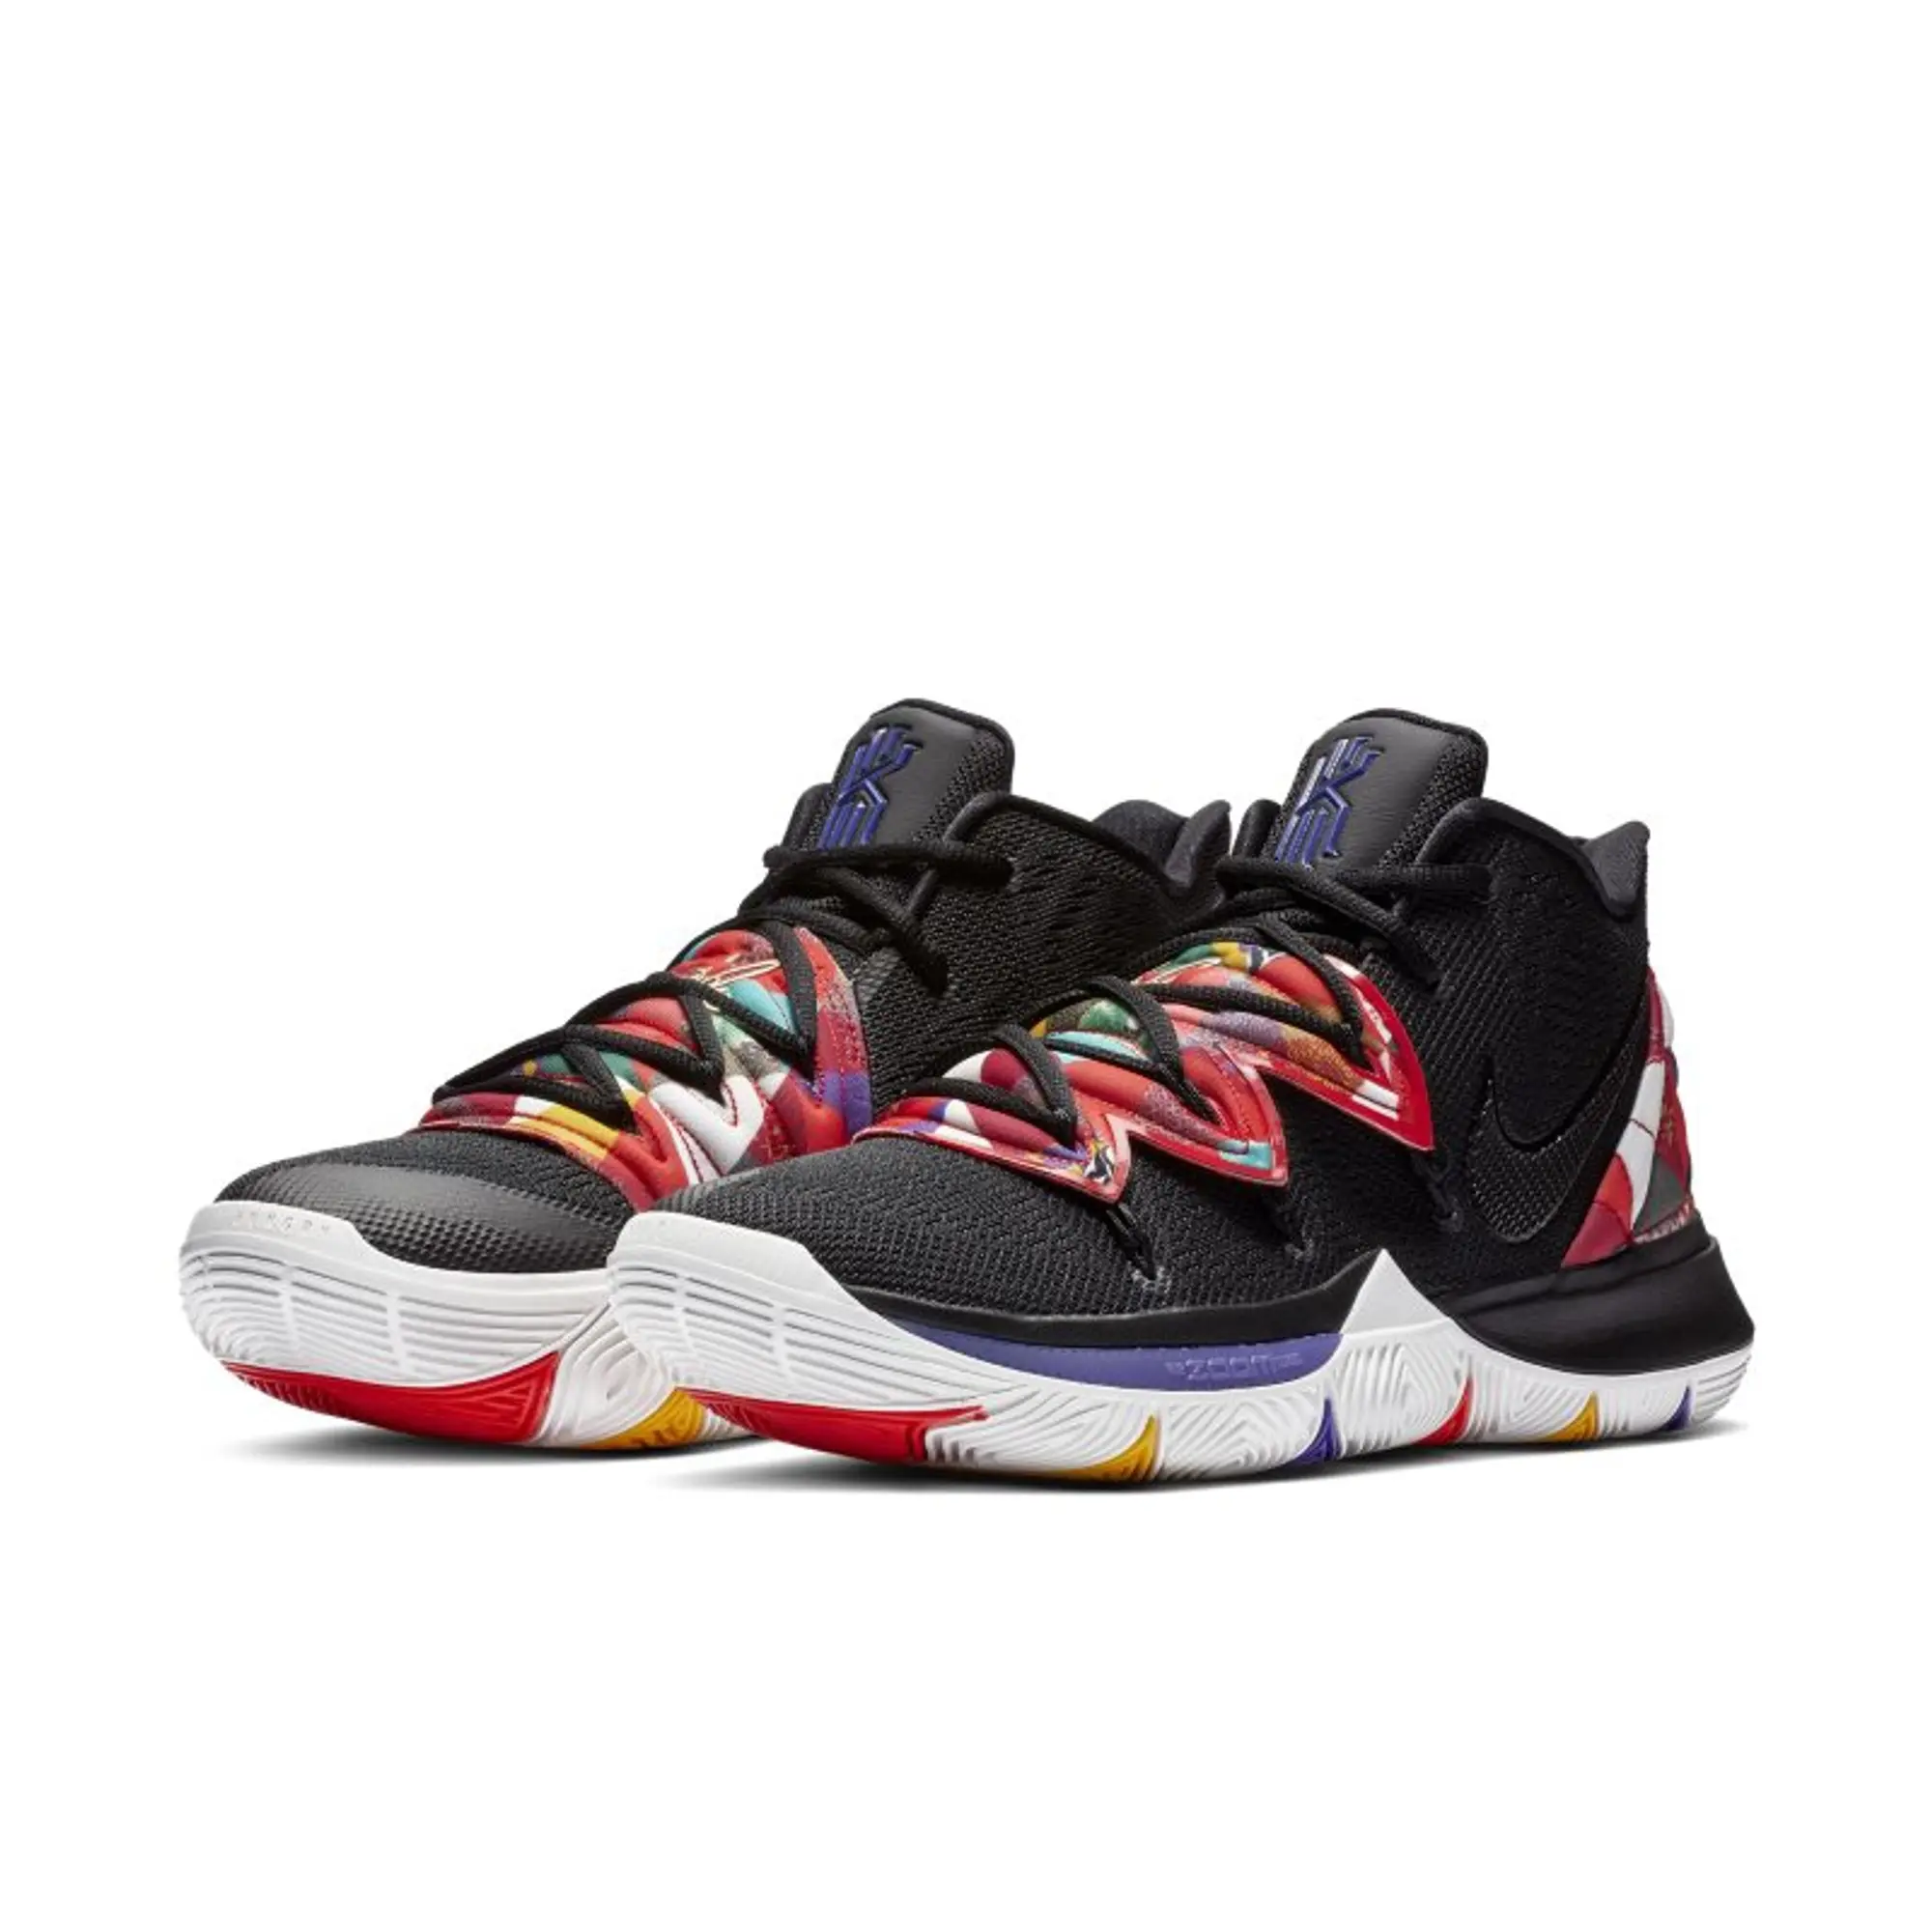 Nike Kyrie 5 Chinese New Year Shoes